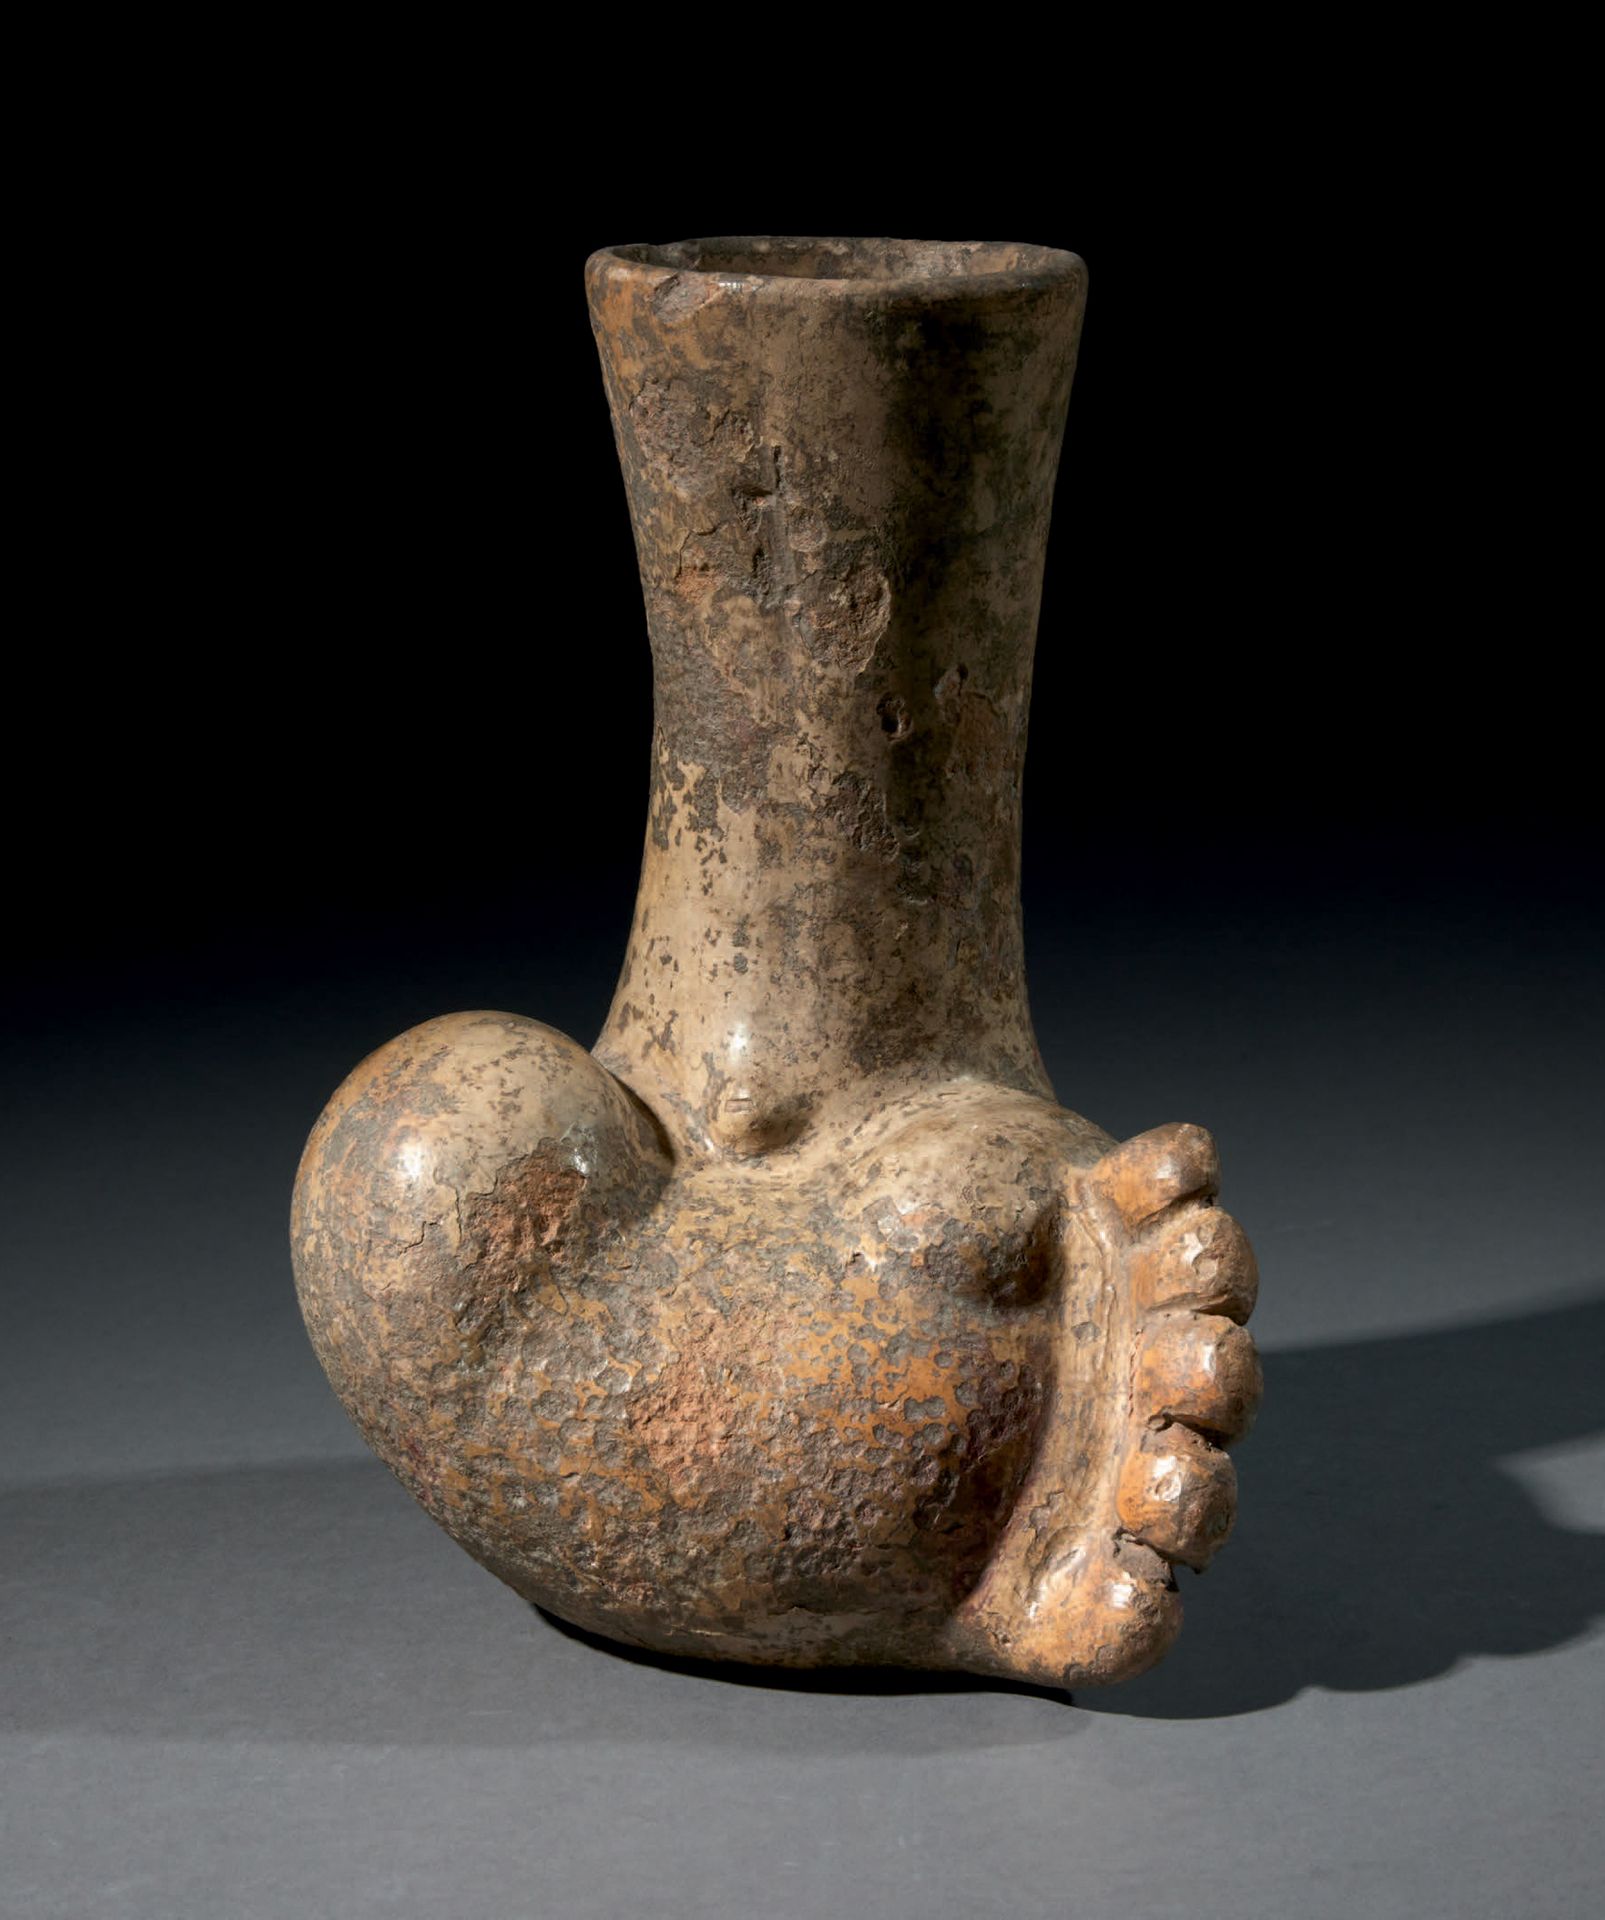 Null Olmec vessel in the shape of a foot, Mexico, ceramic
H. 8 1/16 in